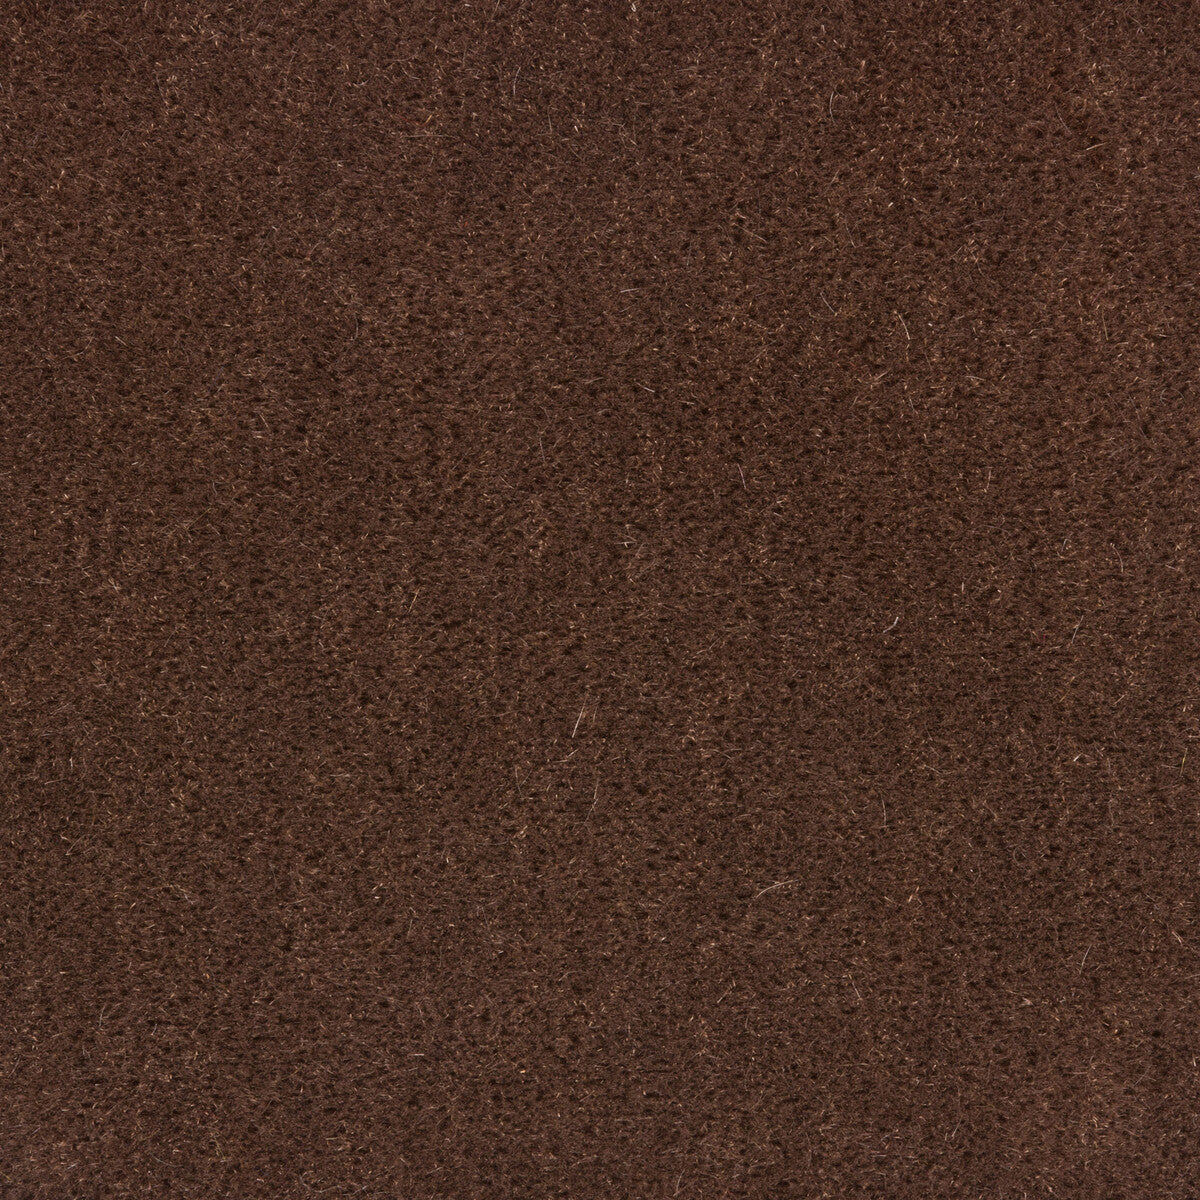 Bachelor Mohair fabric in chocolate color - pattern 8014101.6.0 - by Brunschwig &amp; Fils